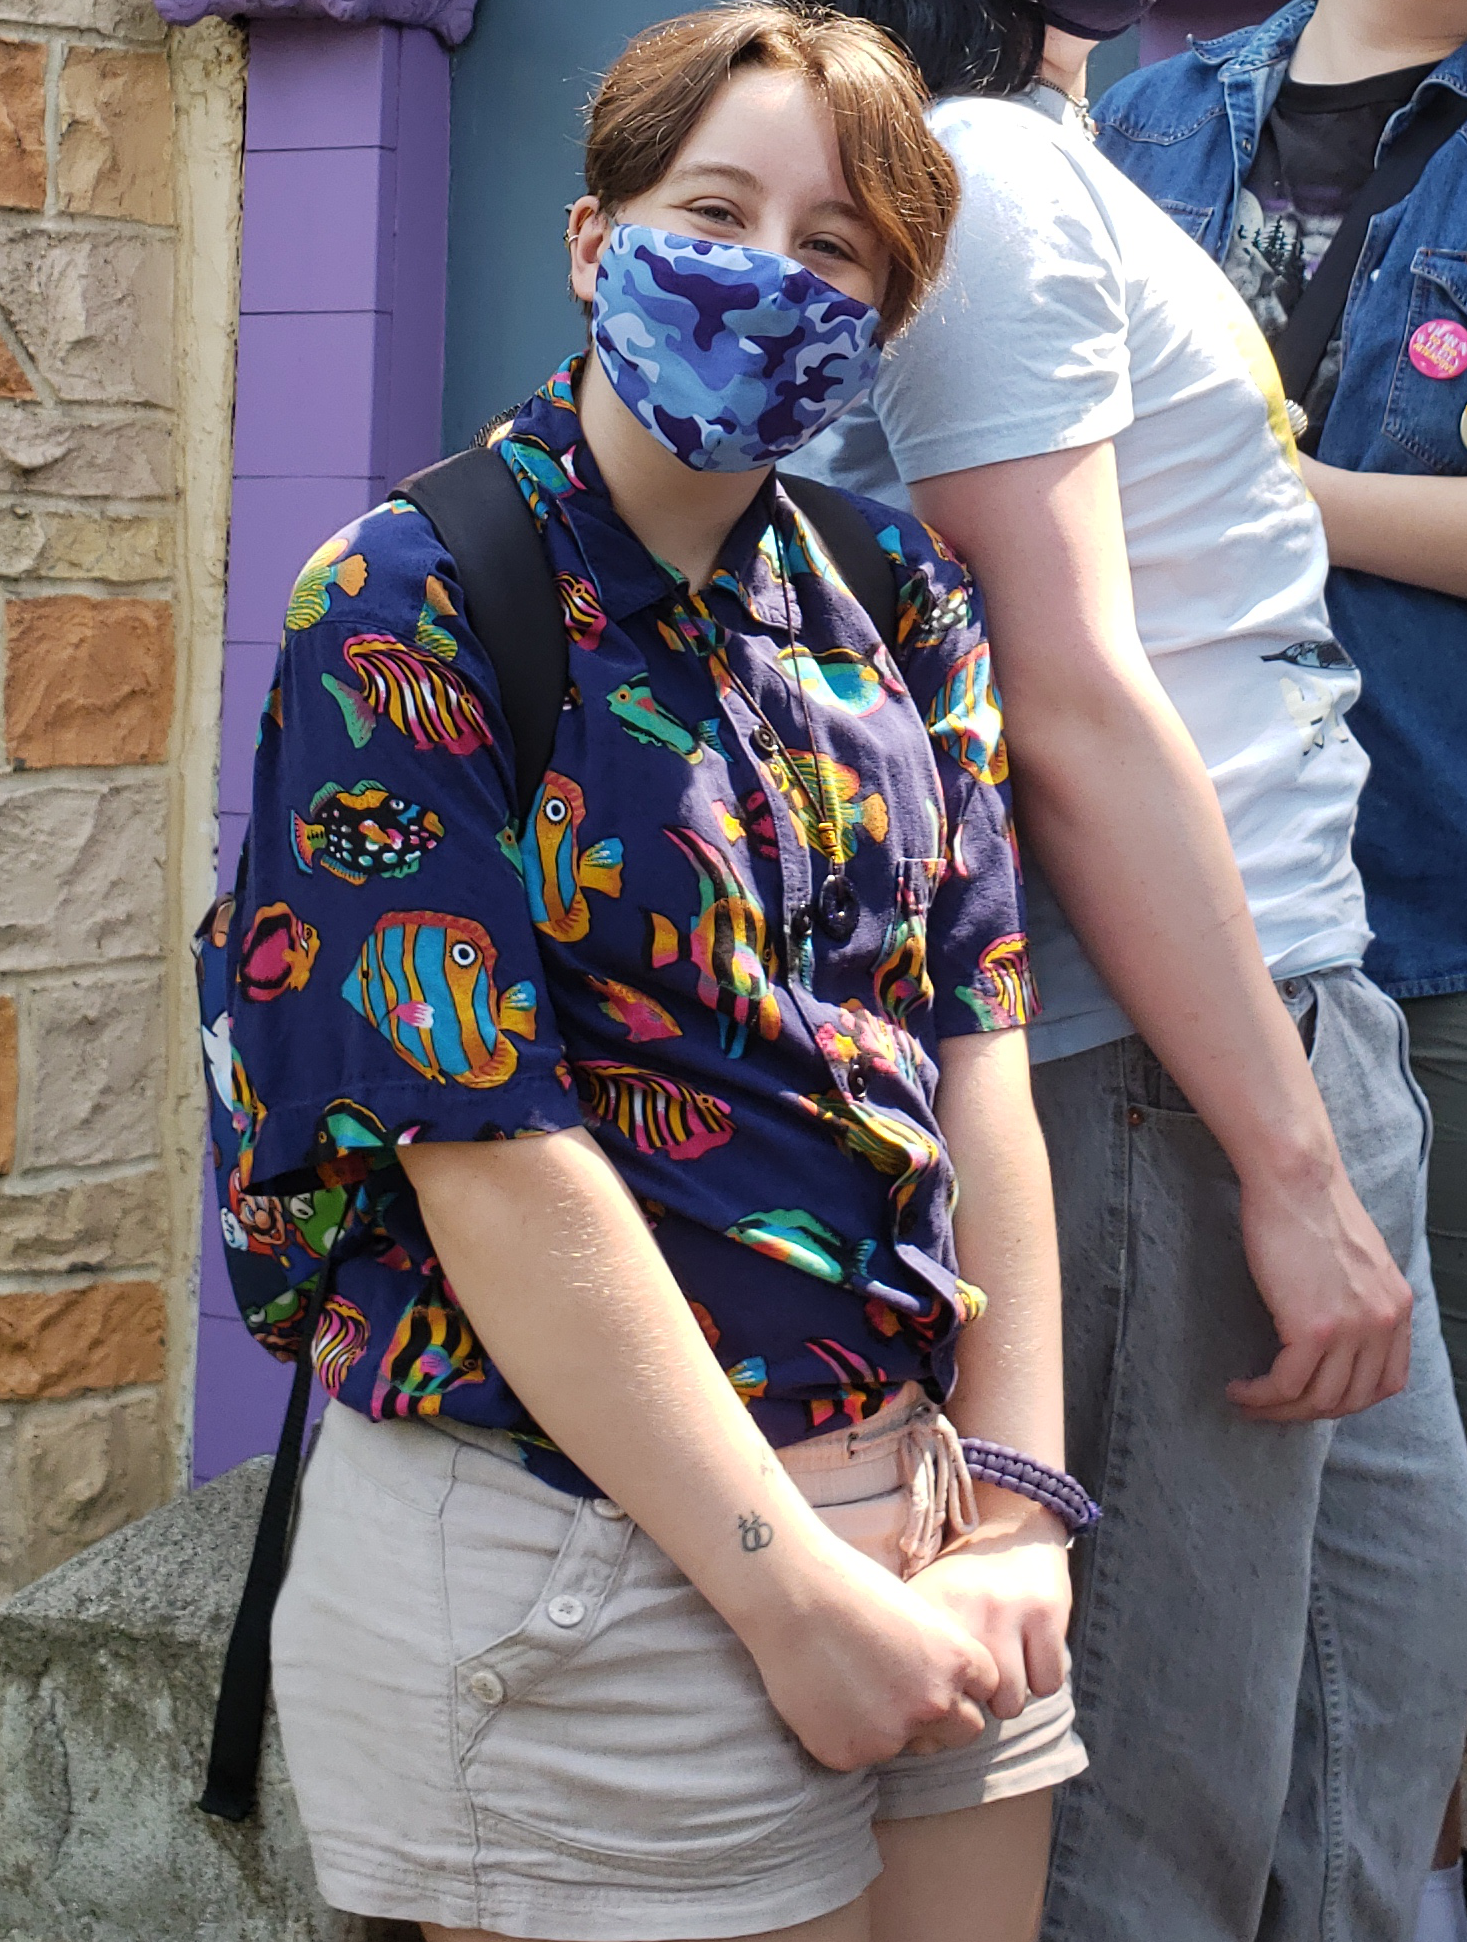 A photo of me, an androgynous white person with autistic body language and a fun tropical fish buttonup, smiling visibly even under a mask.